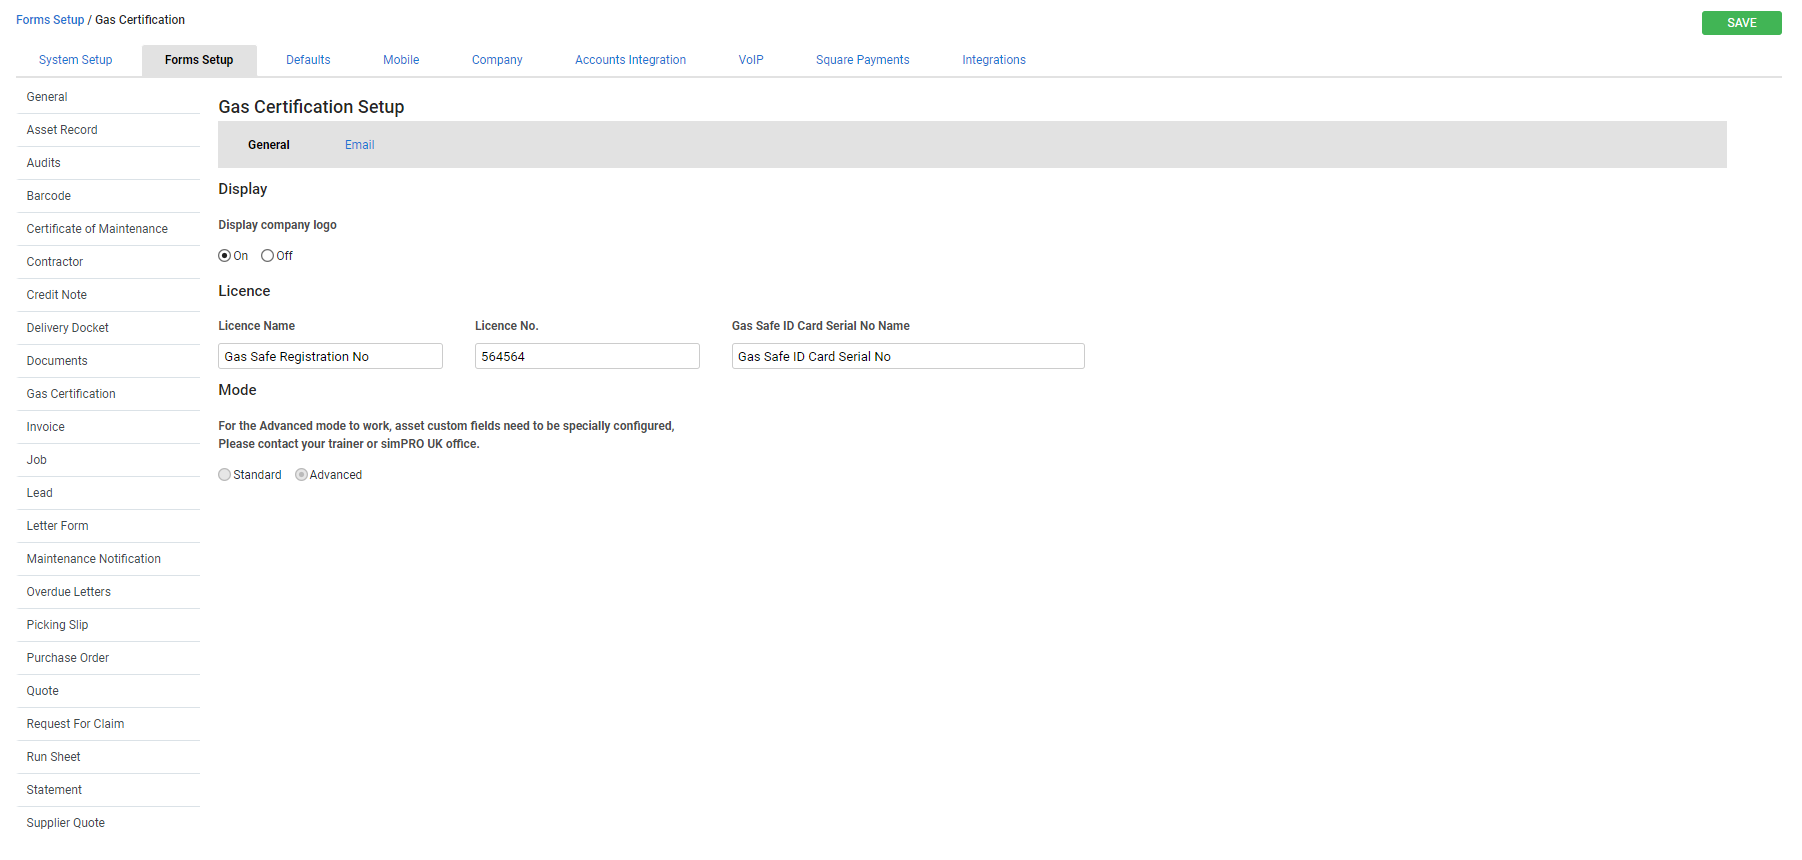 A screenshot of the Gas Certification Forms Setup page.